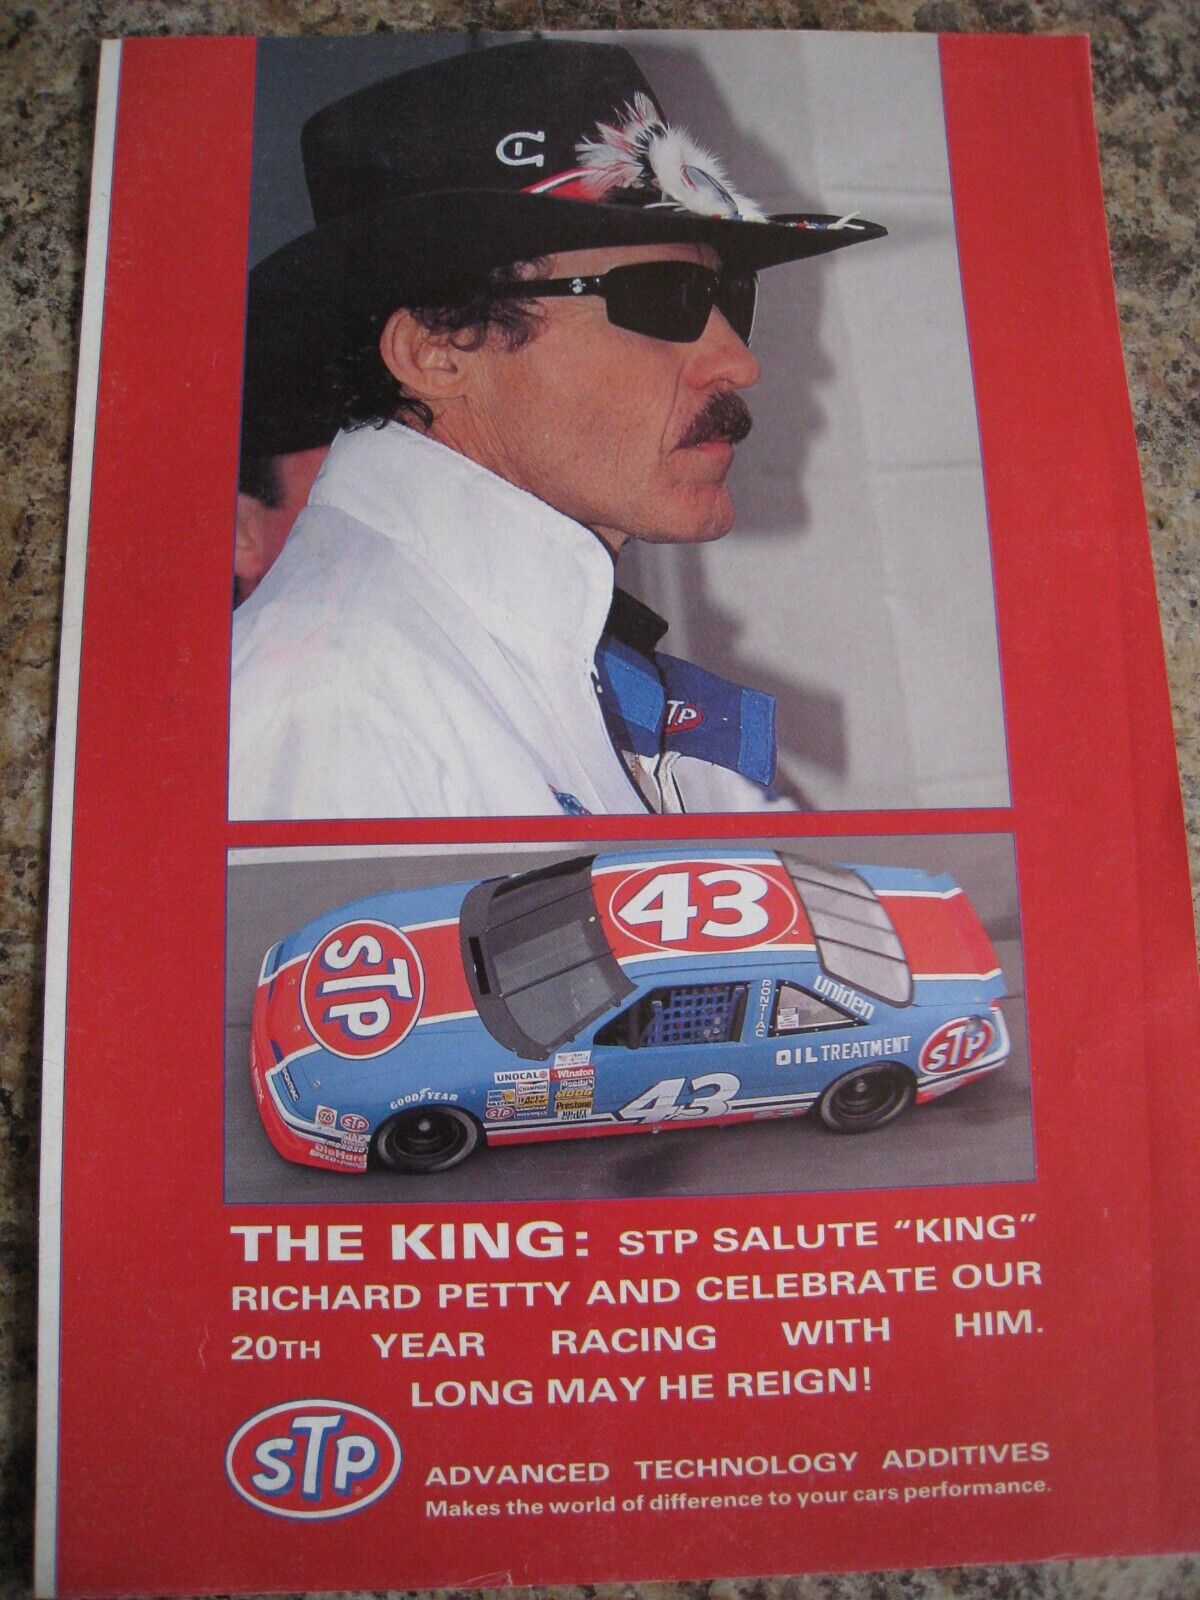 STP SALUTE KING RICHARD PETTY CELEBRATE 20TH YEAR WITH HIM1991 ADVERT A4 FILE 29